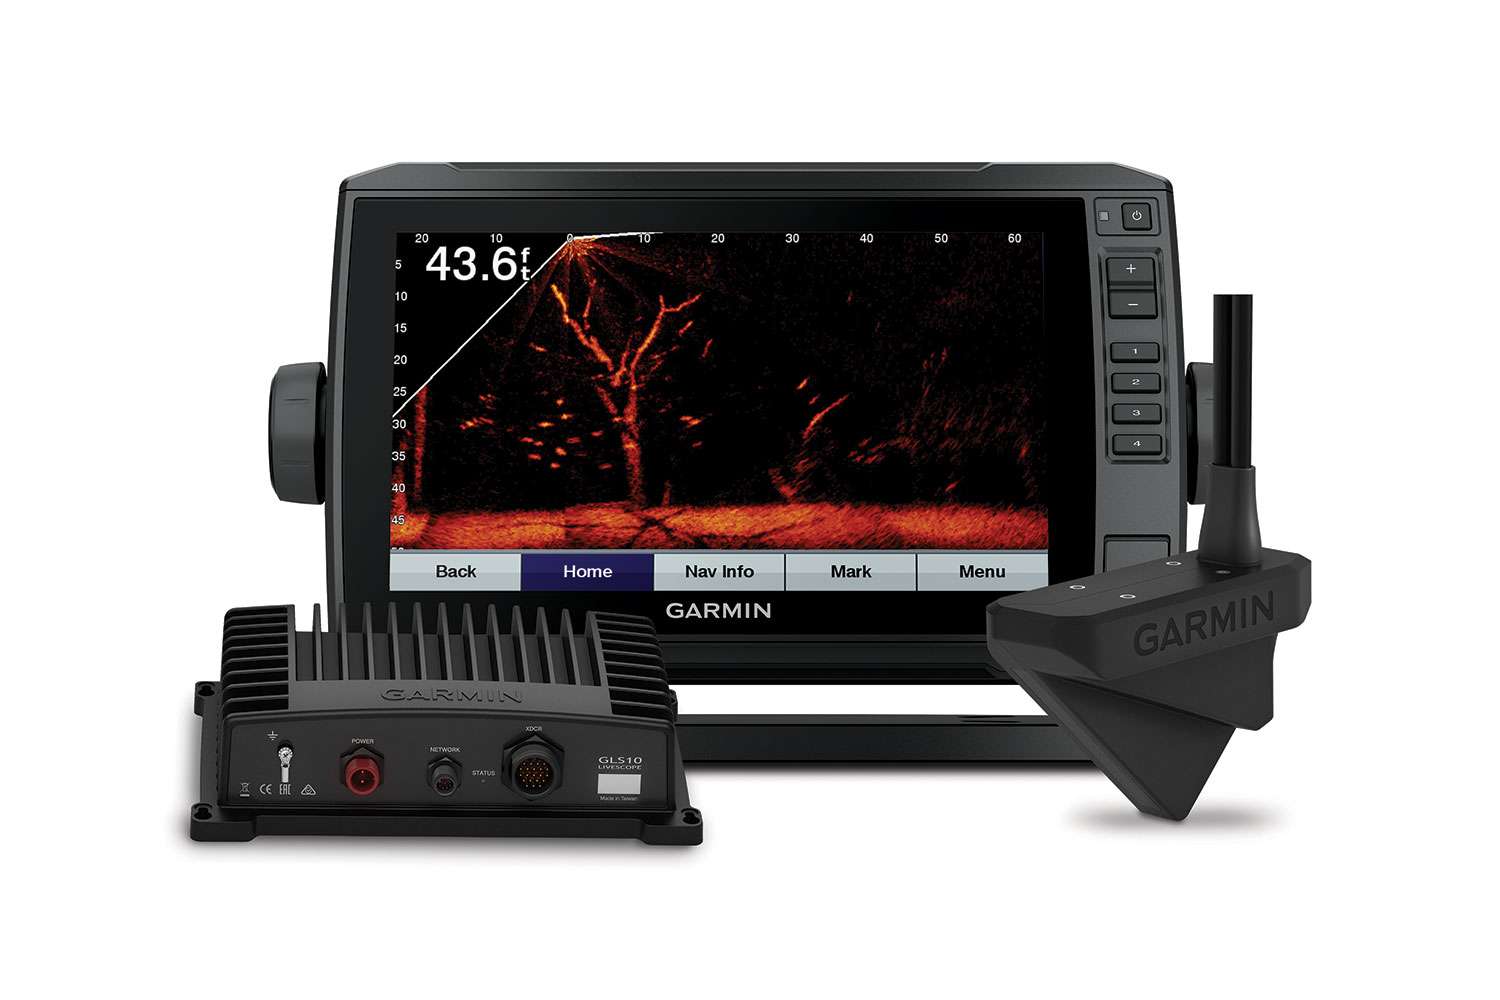 <p><b>Garmin Panopotix LiveScope, $1,499.99</b></p> Panoptix LiveScope is the first and only live real-time scanning sonar. It gives anglers easy-to-interpret live scanning sonar images of structure, bait and fish swimming below and all around the boat, even when itâs stationary. LiveScope features two modes in one transducer â LiveScope Down and LiveScope Forward â and can easily be adjusted to fit the anglerâs fishing techniques. Simply point the LiveScope transducer down to see directly below the boat, or forward to see around the boat. Either view provides incredibly sharp, real-time scanning sonar images up to 200 feet down or away from the boat, and the view automatically changes on your compatible Garmin chartplotter screen. </p>  LiveScope is also equipped with an attitude heading reference system (AHRS) that constantly adjusts sonar beams to compensate for boat motion, so even in rough conditions, anglers will still see a steady sonar image. The Panoptix LiveScope scanning sonar system includes a compact GLS 10 sonar black box with an LVS32 transducer and a simple plug-and-play Garmin Marine Network connector for easy installation and integration with a compatible Garmin chartplotter. A trolling motor barrel and shaft mounting kit and a transom mounting kit are also included.<br> <a href=